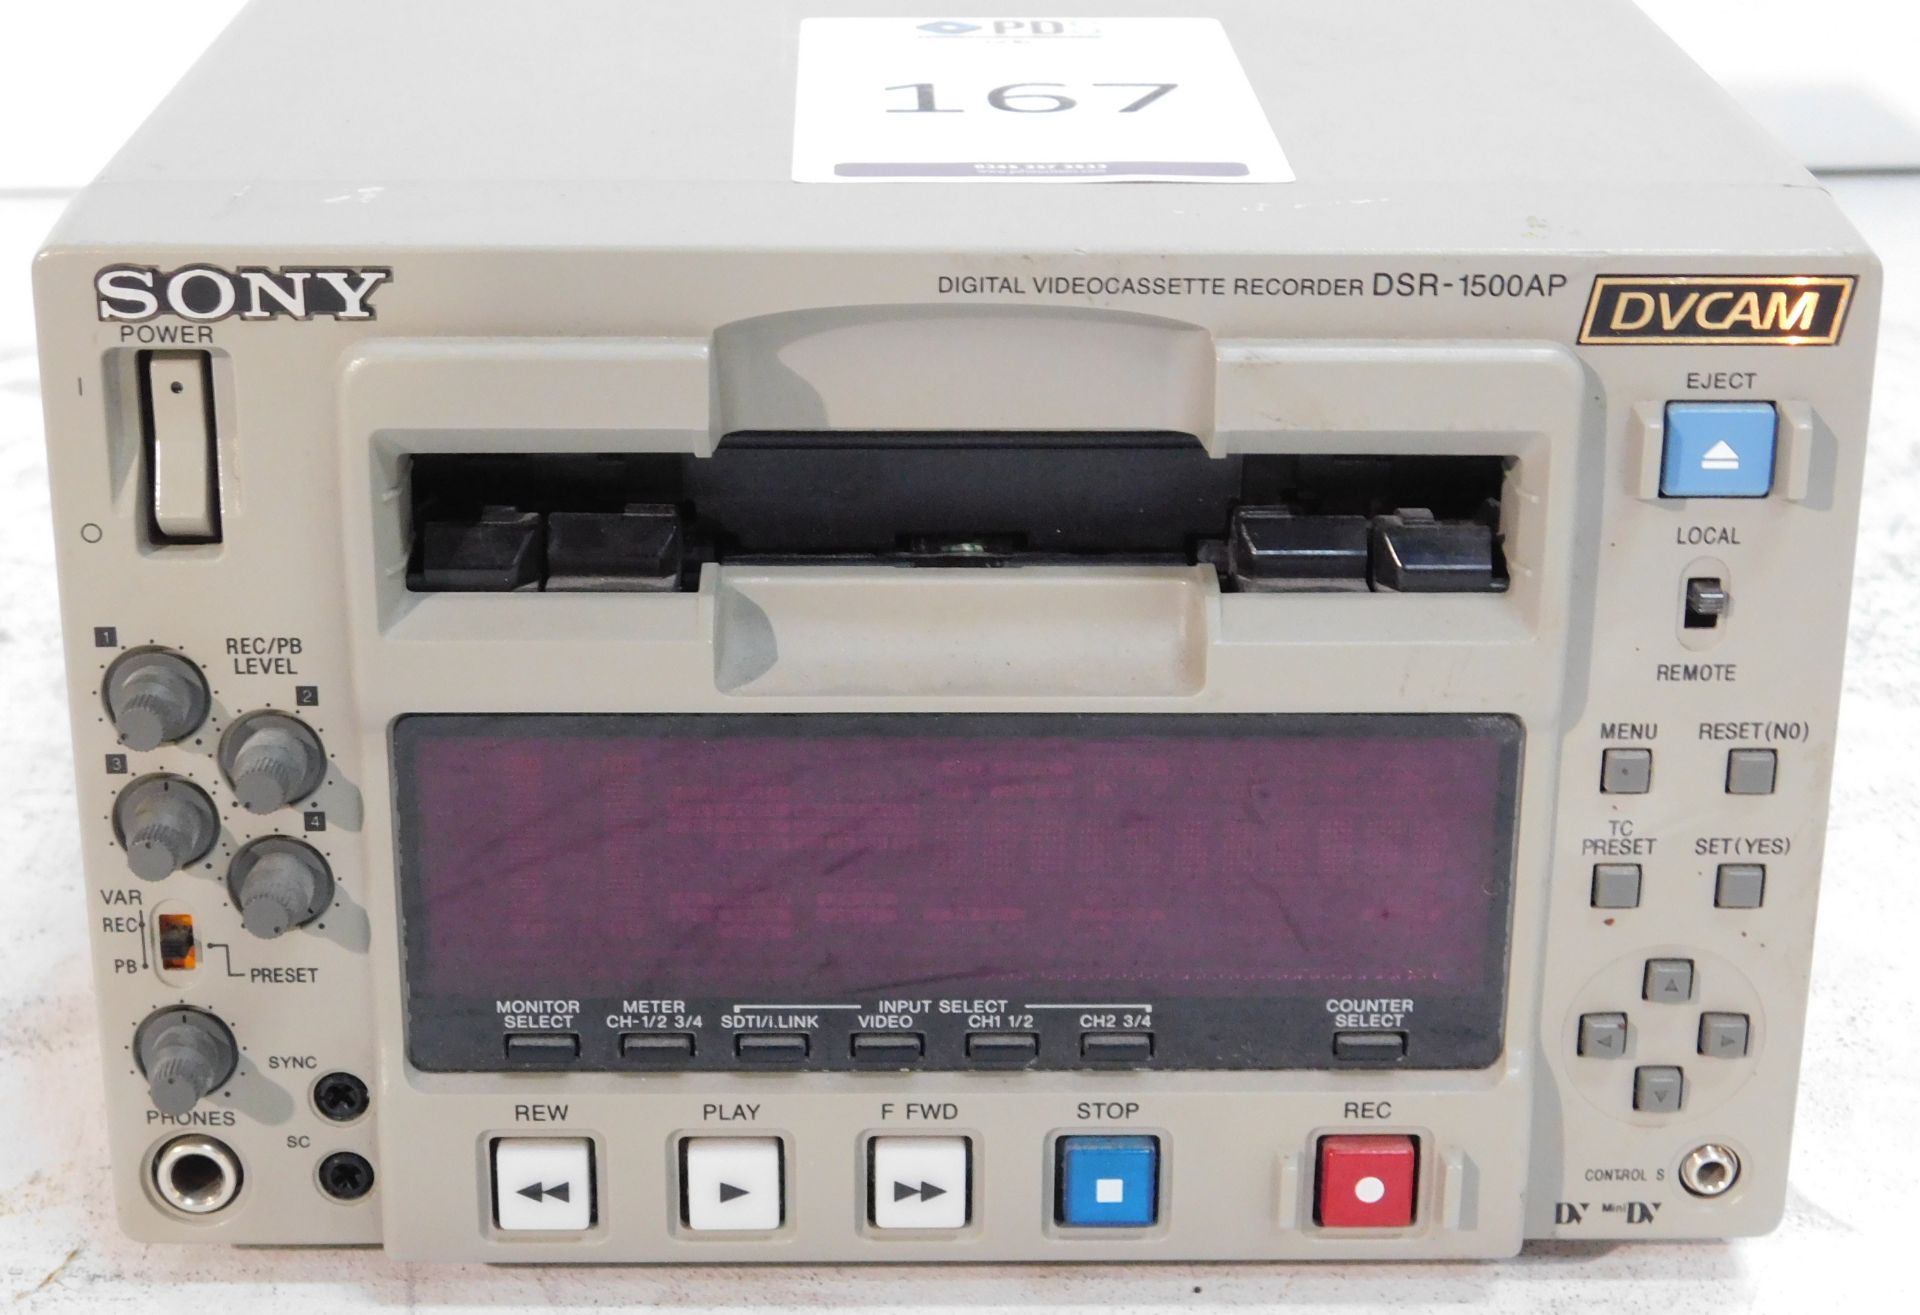 Sony DSR-1500 AP Digital Video Cassette Recorder (Location Brentwood. Please Refer to General - Image 2 of 3